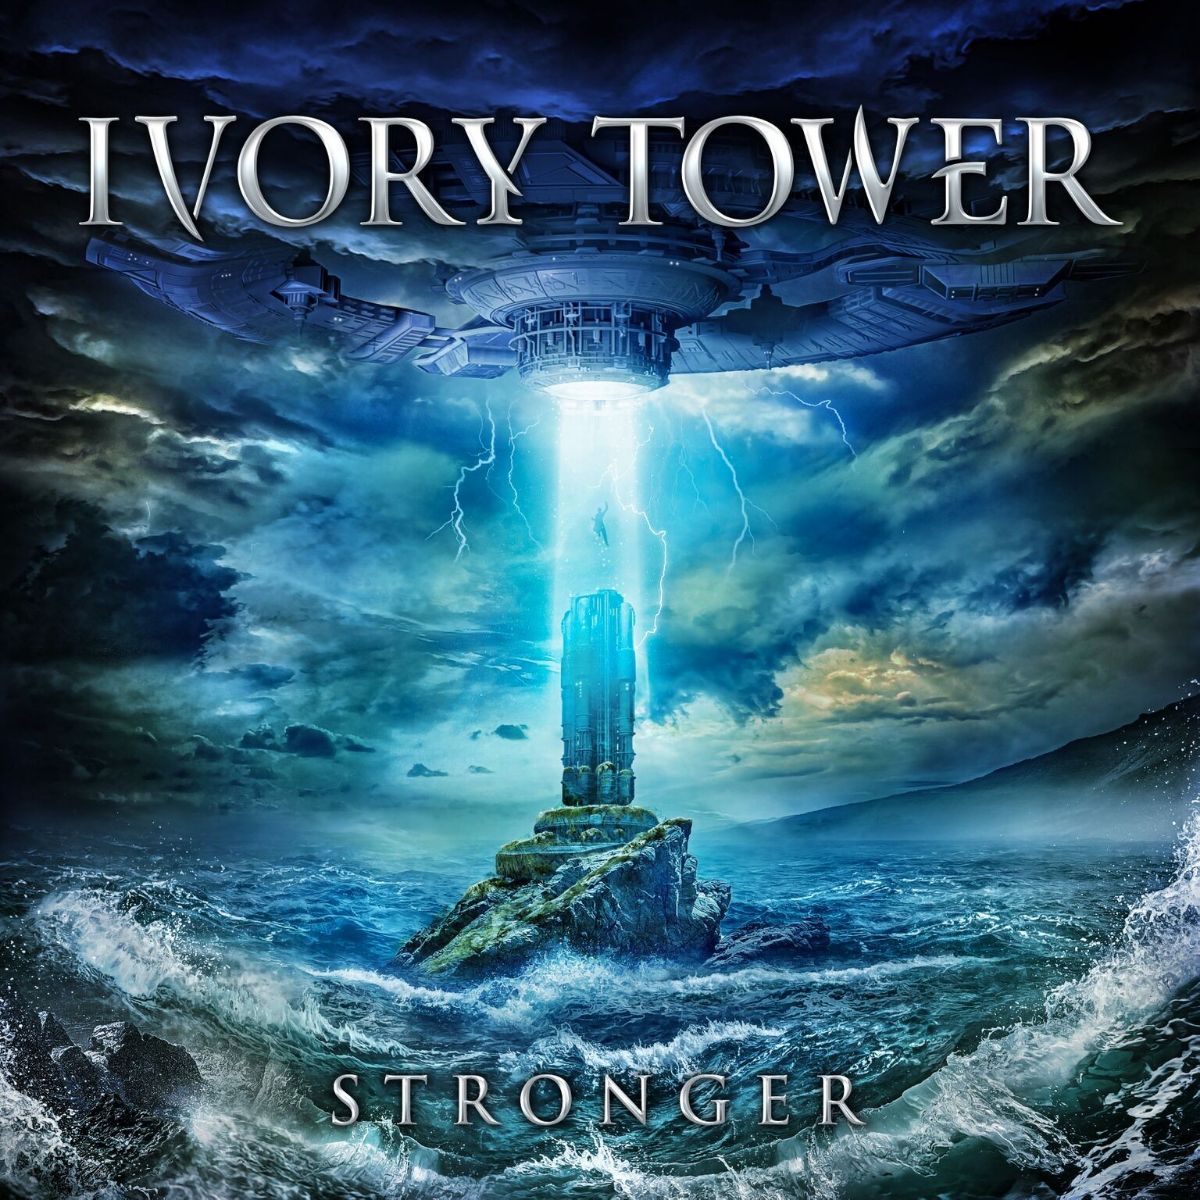 IVORY TOWER - reveal